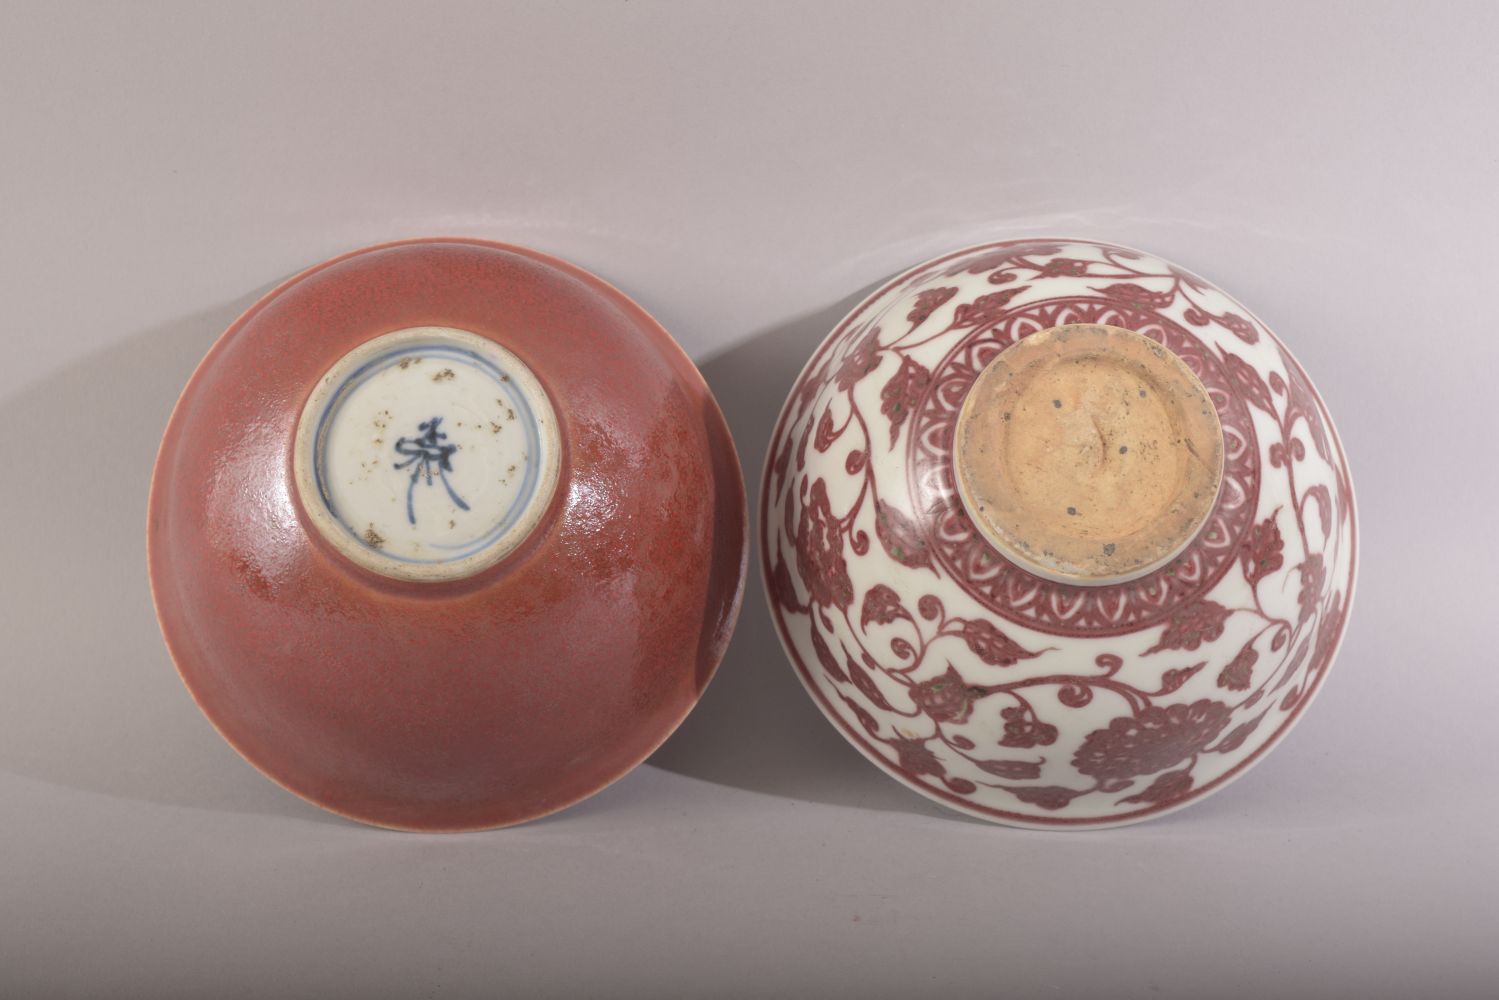 TWO CHINESE PORCELAIN BOWLS, one with red and white floral decoration, the other with red - Image 6 of 7